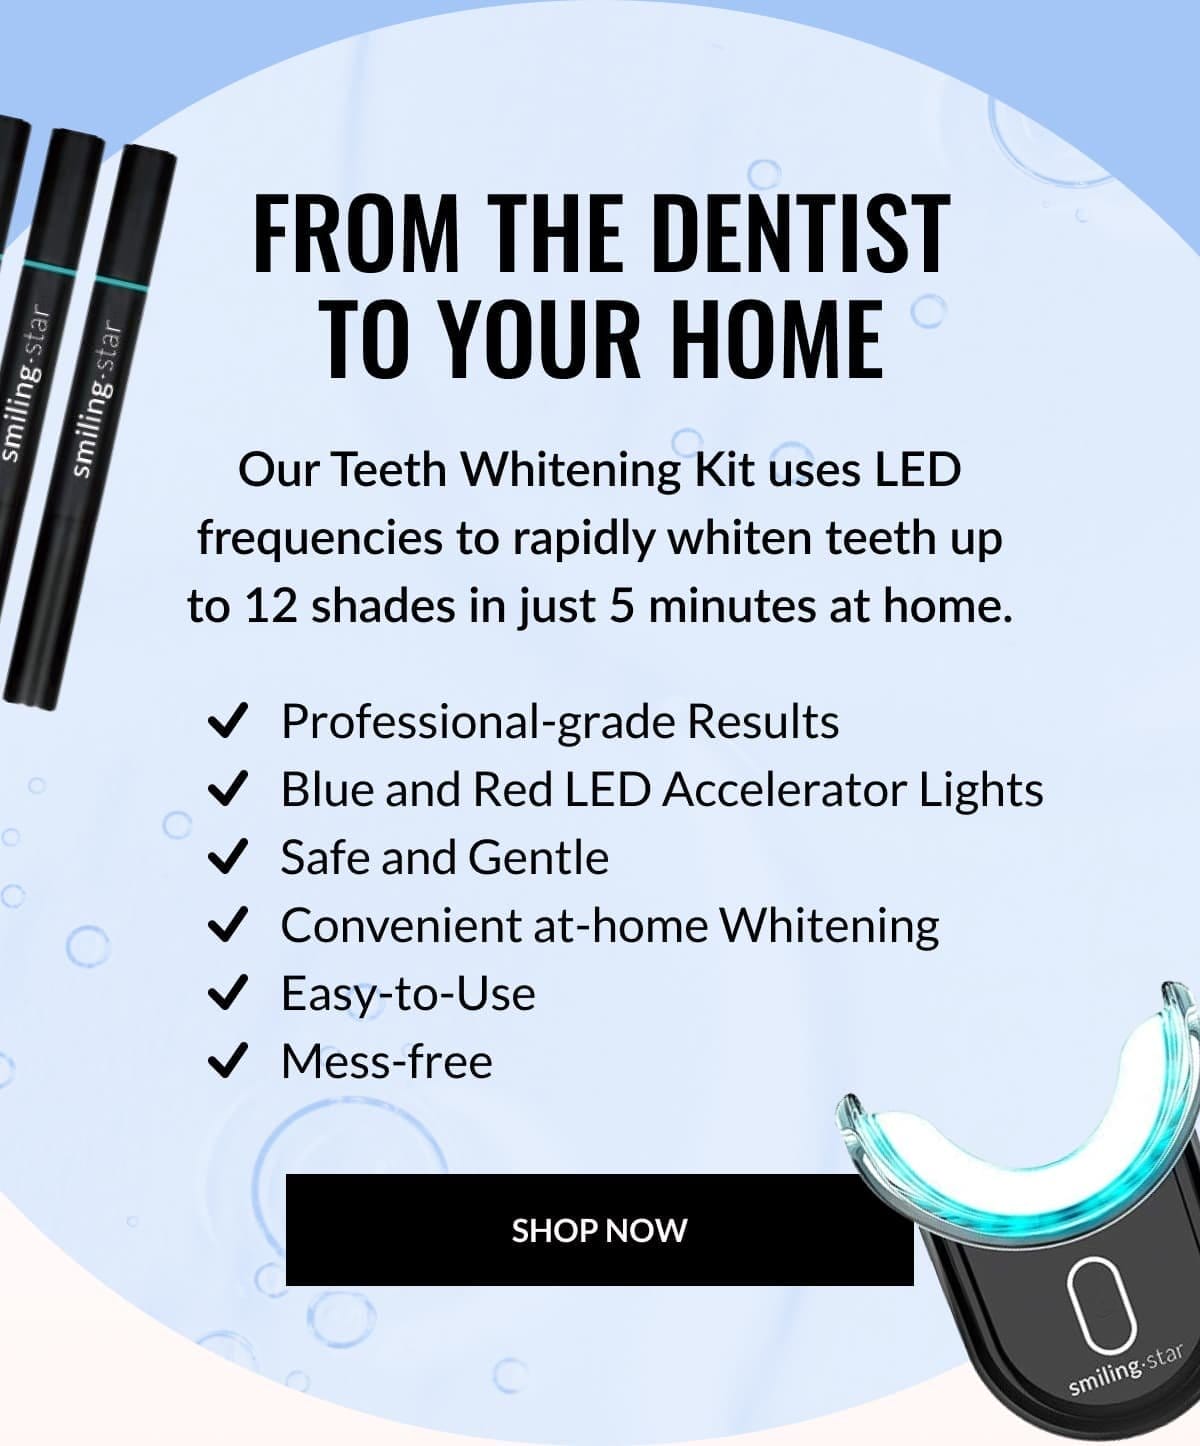 From the dentist to your home